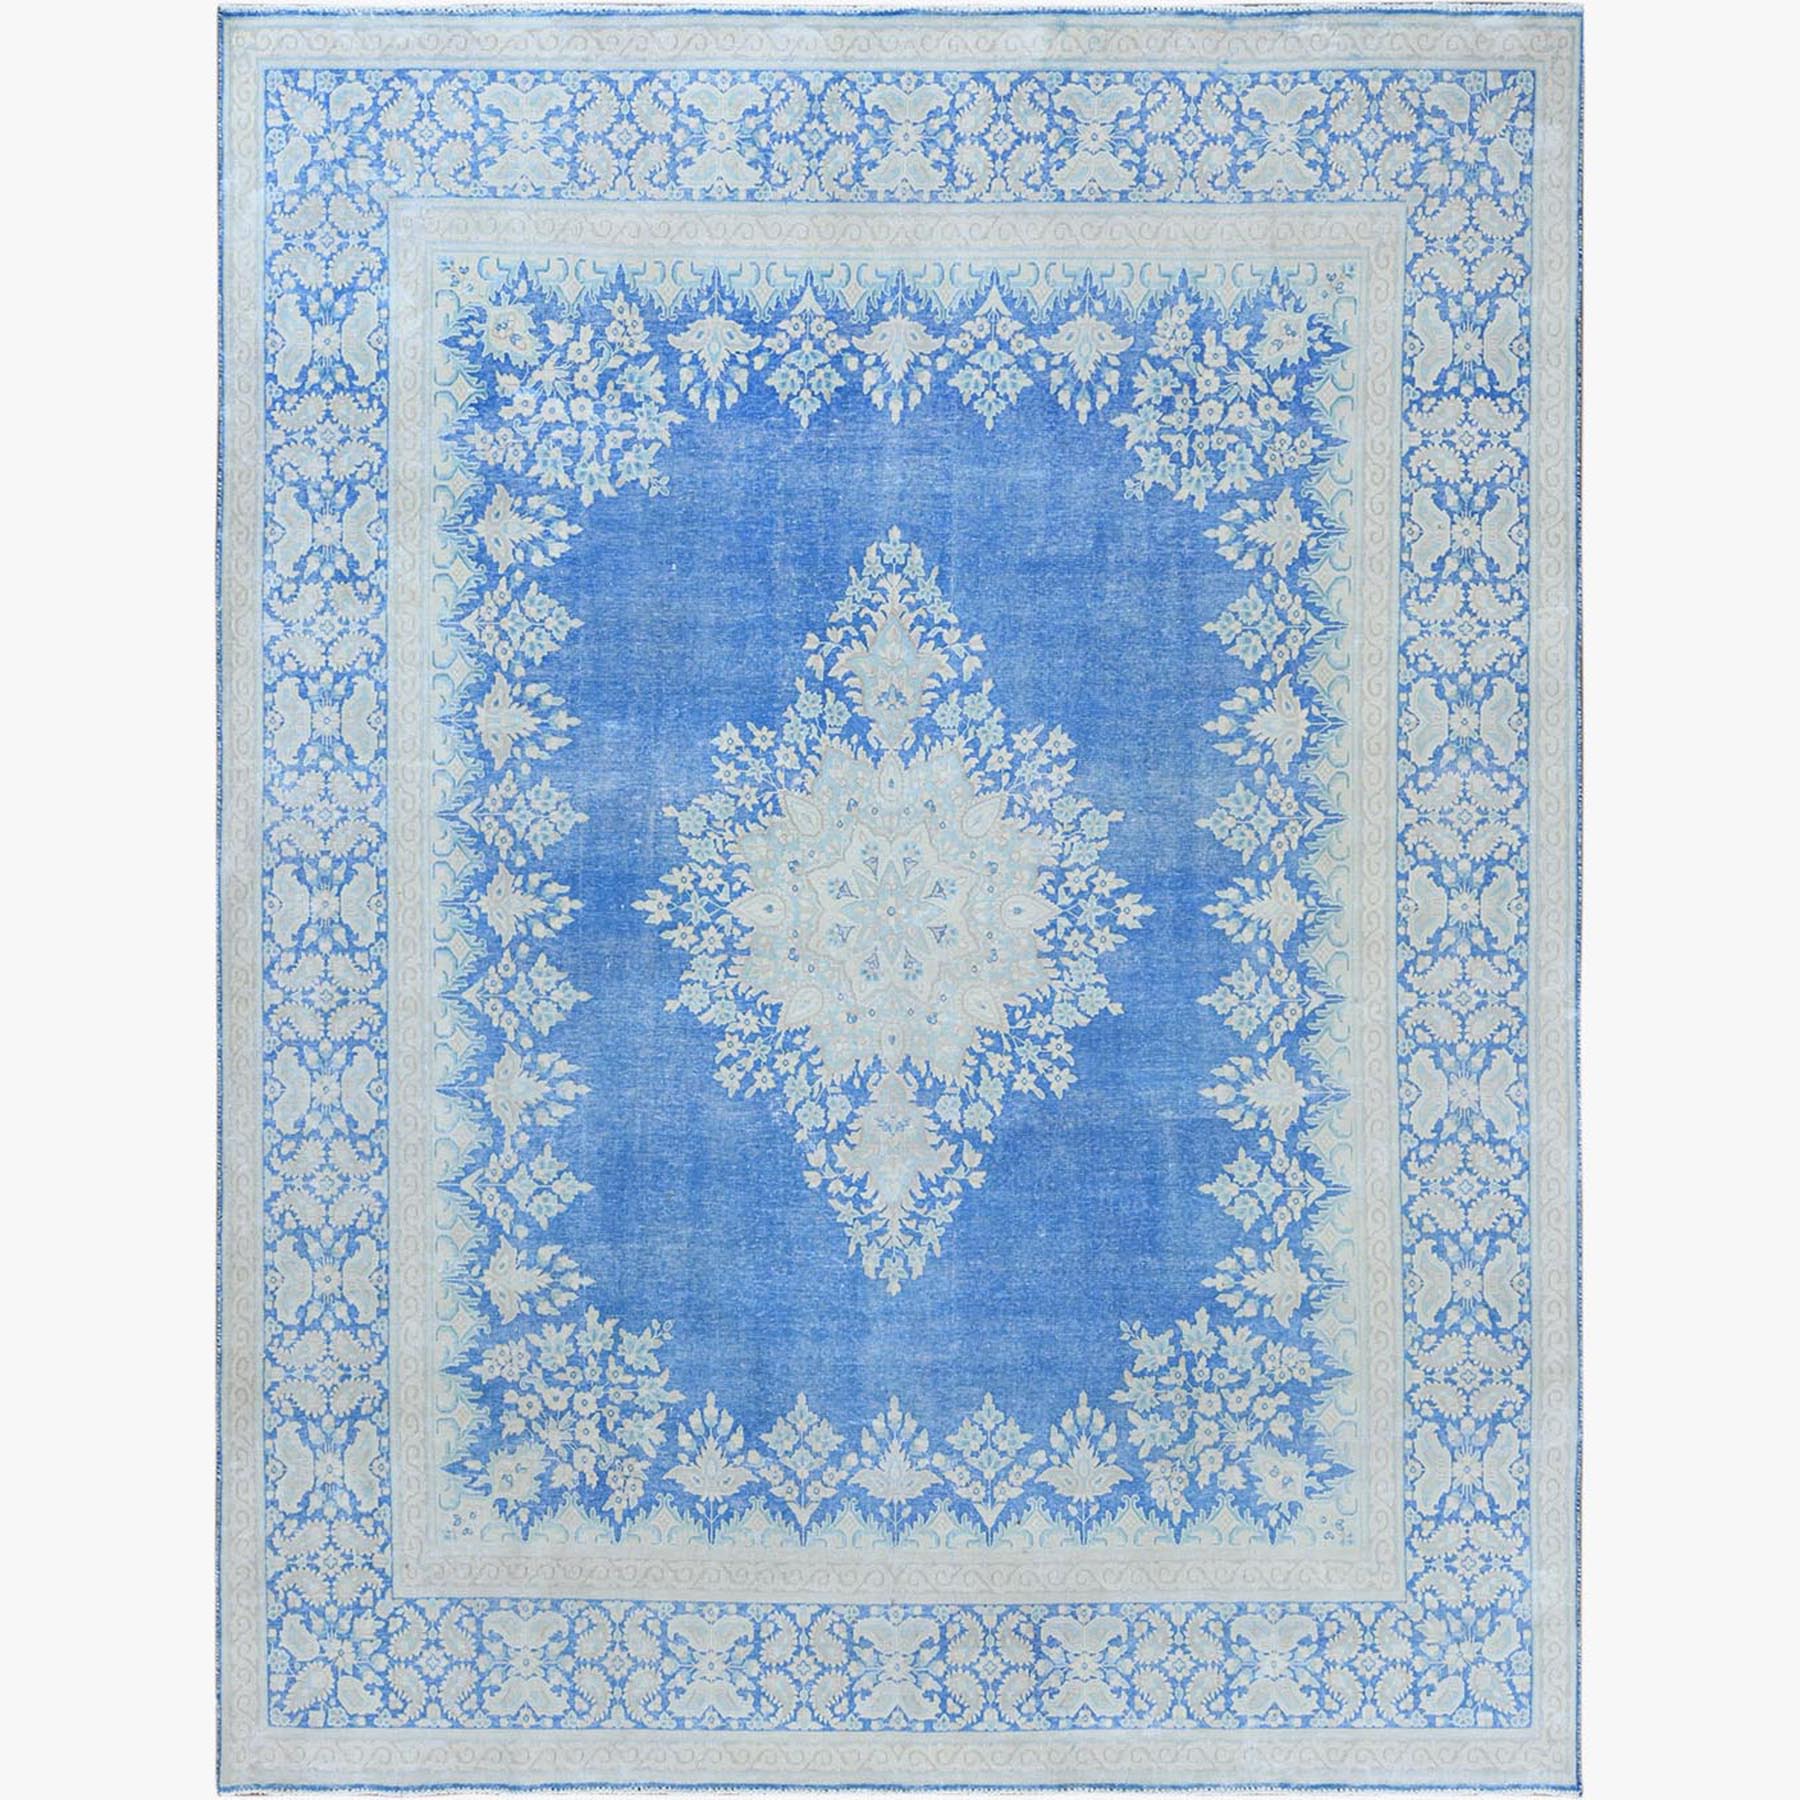 9'7"x12'7" Bohemian Faded Blue with Big Medallion Design Persian Kerman Clean Pure Wool Distressed Vintage Hand Woven Antique Wash Oriental Rug 